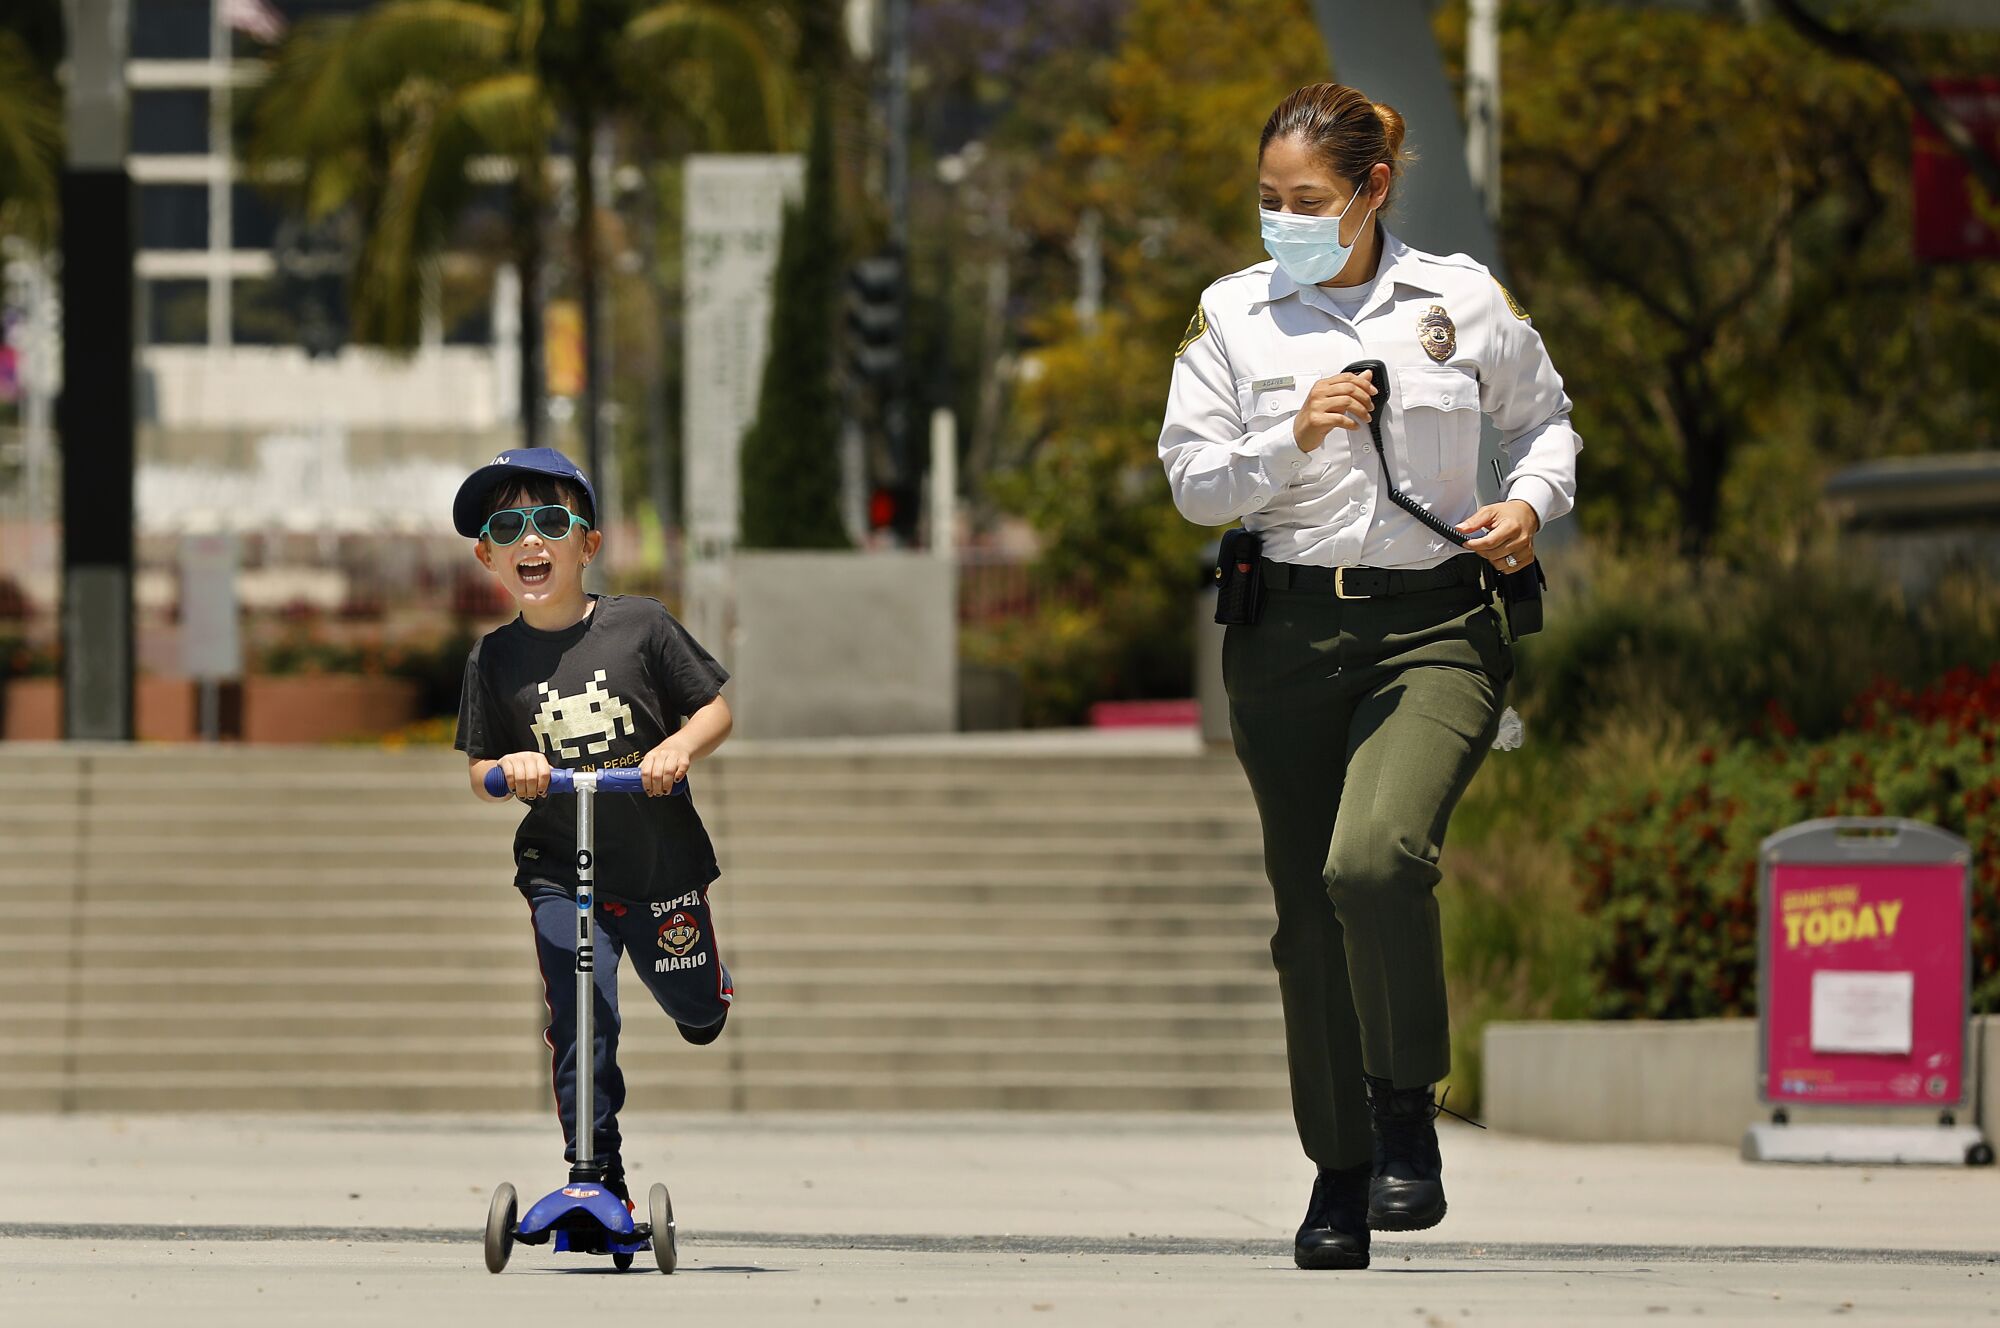 Patton Soole, 5, left, shares a friendly race with L..A County Sheriff's Deputy Bridget Adams at Grand Park in downtown Los Angeles.